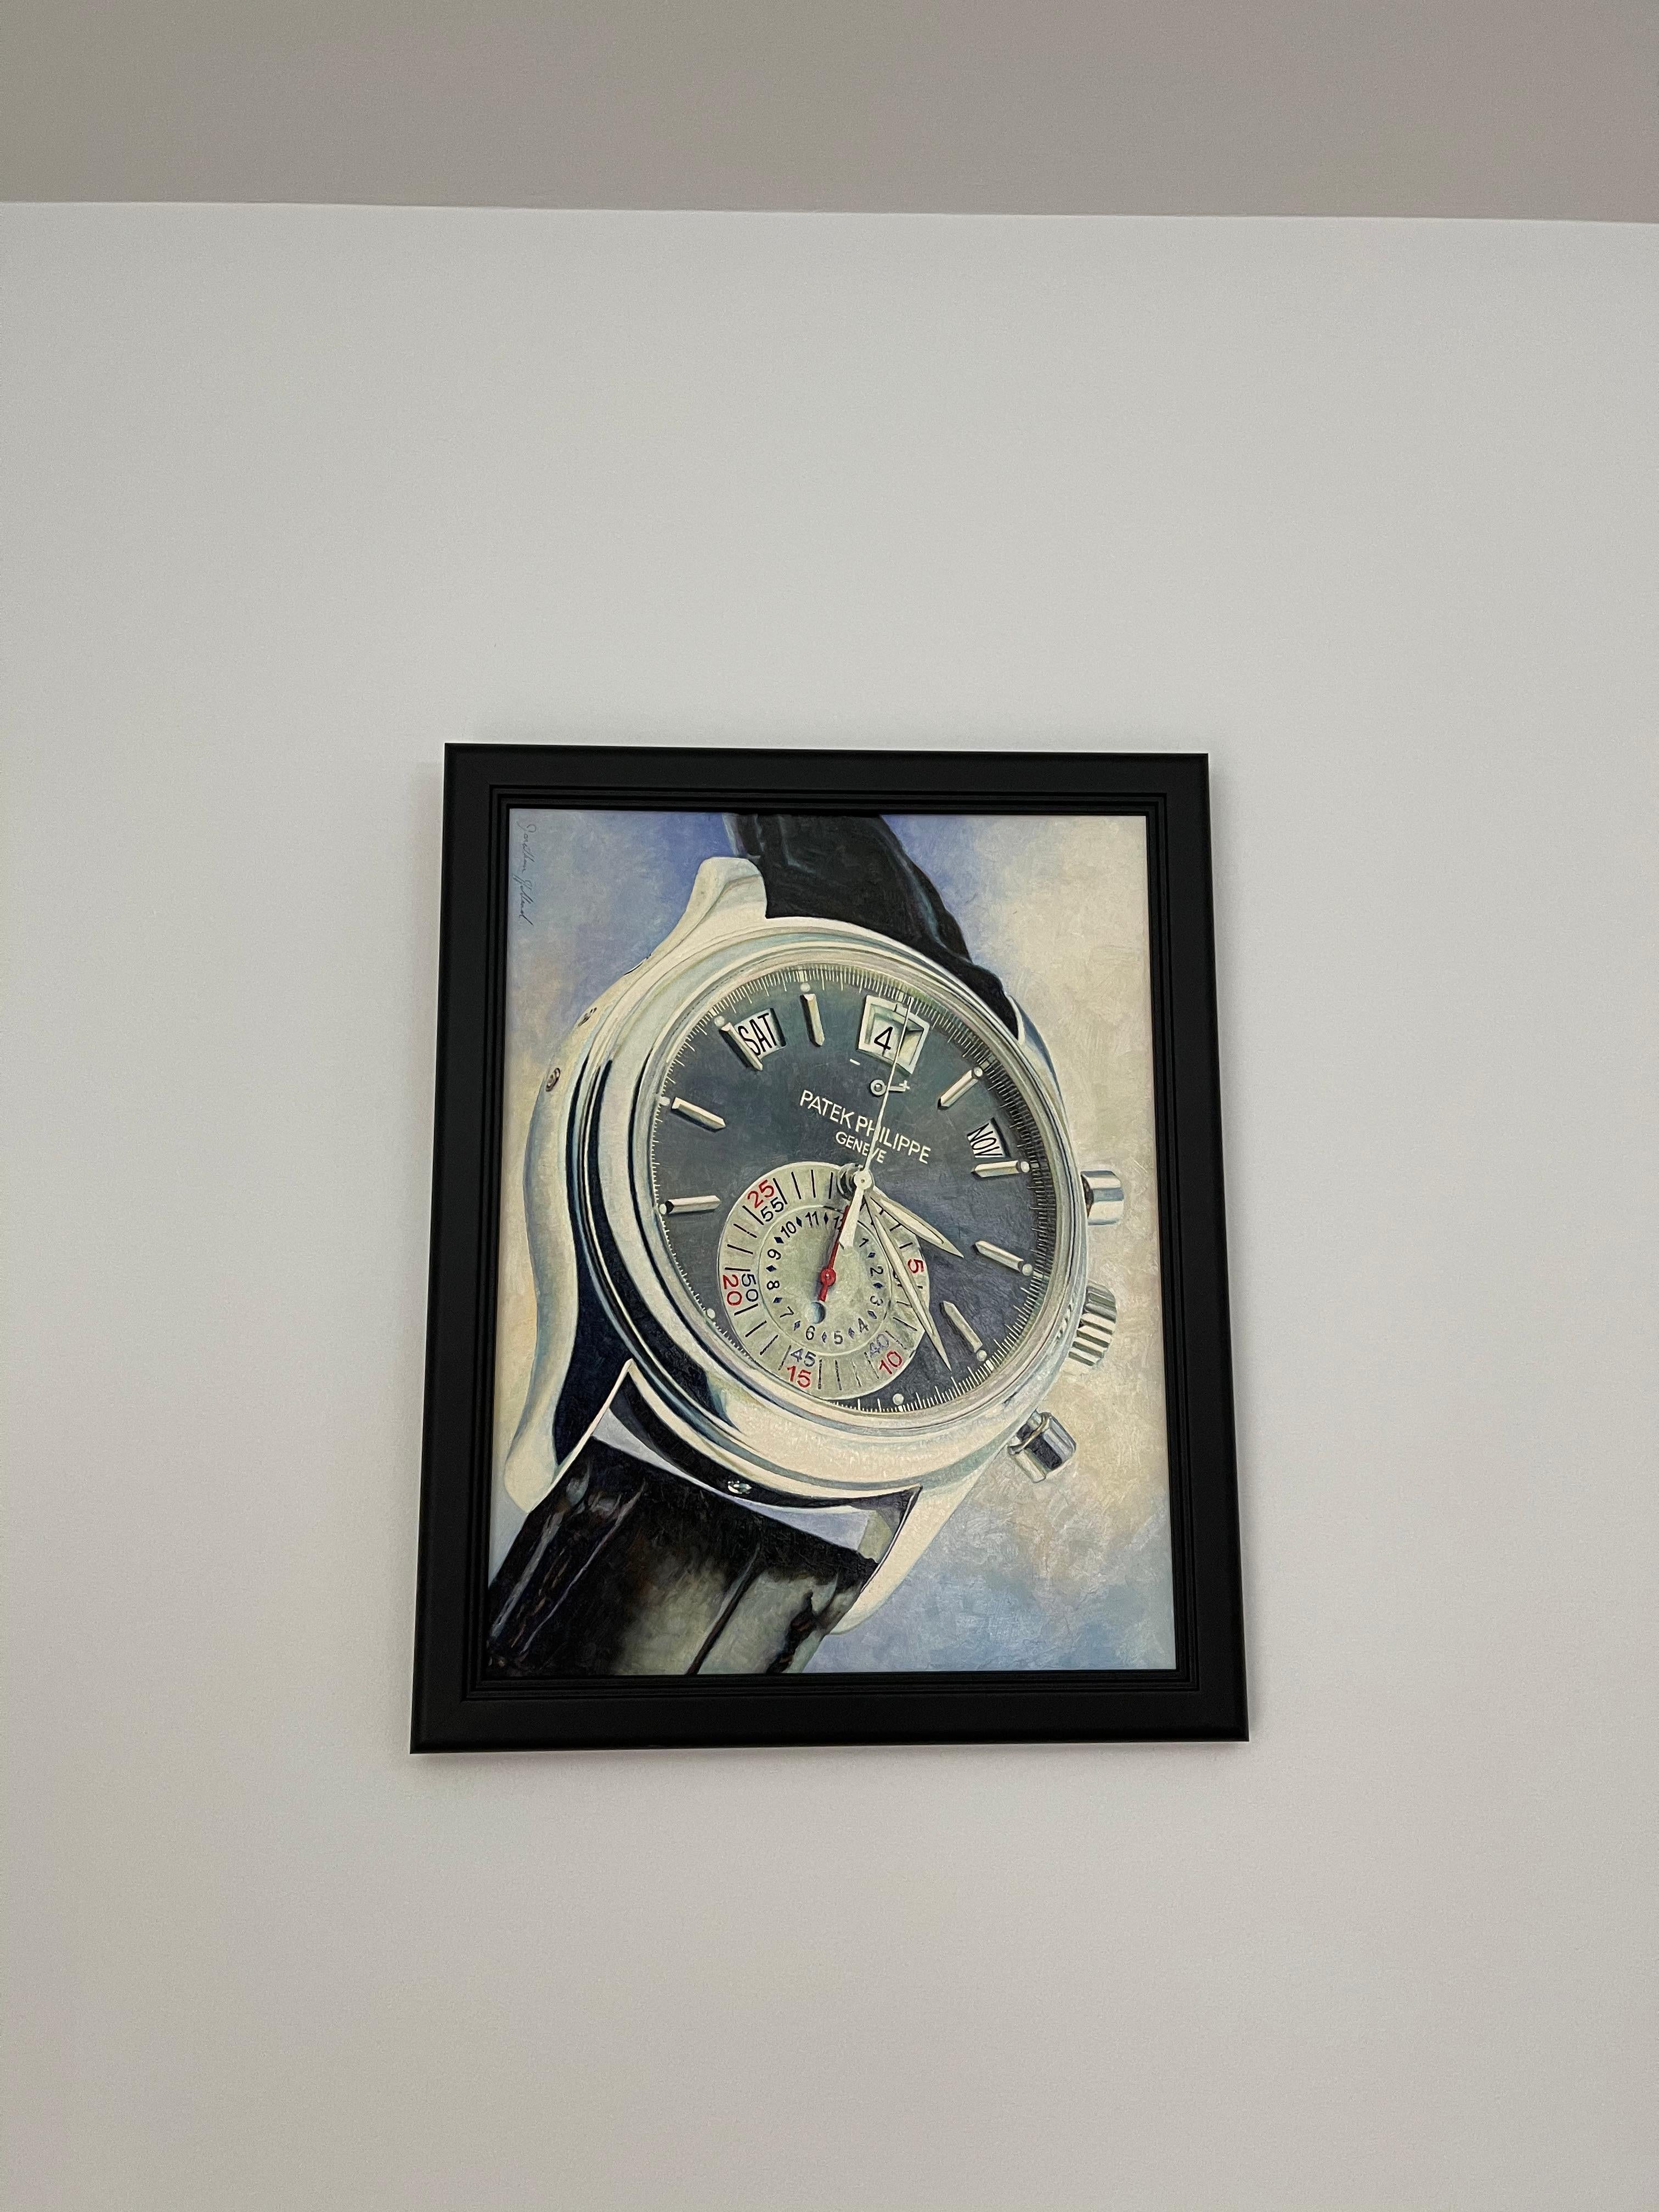 Patek Philippe 5960P Annual Calendar Chronograph wall art oil painting In Excellent Condition For Sale In Ottawa, ON